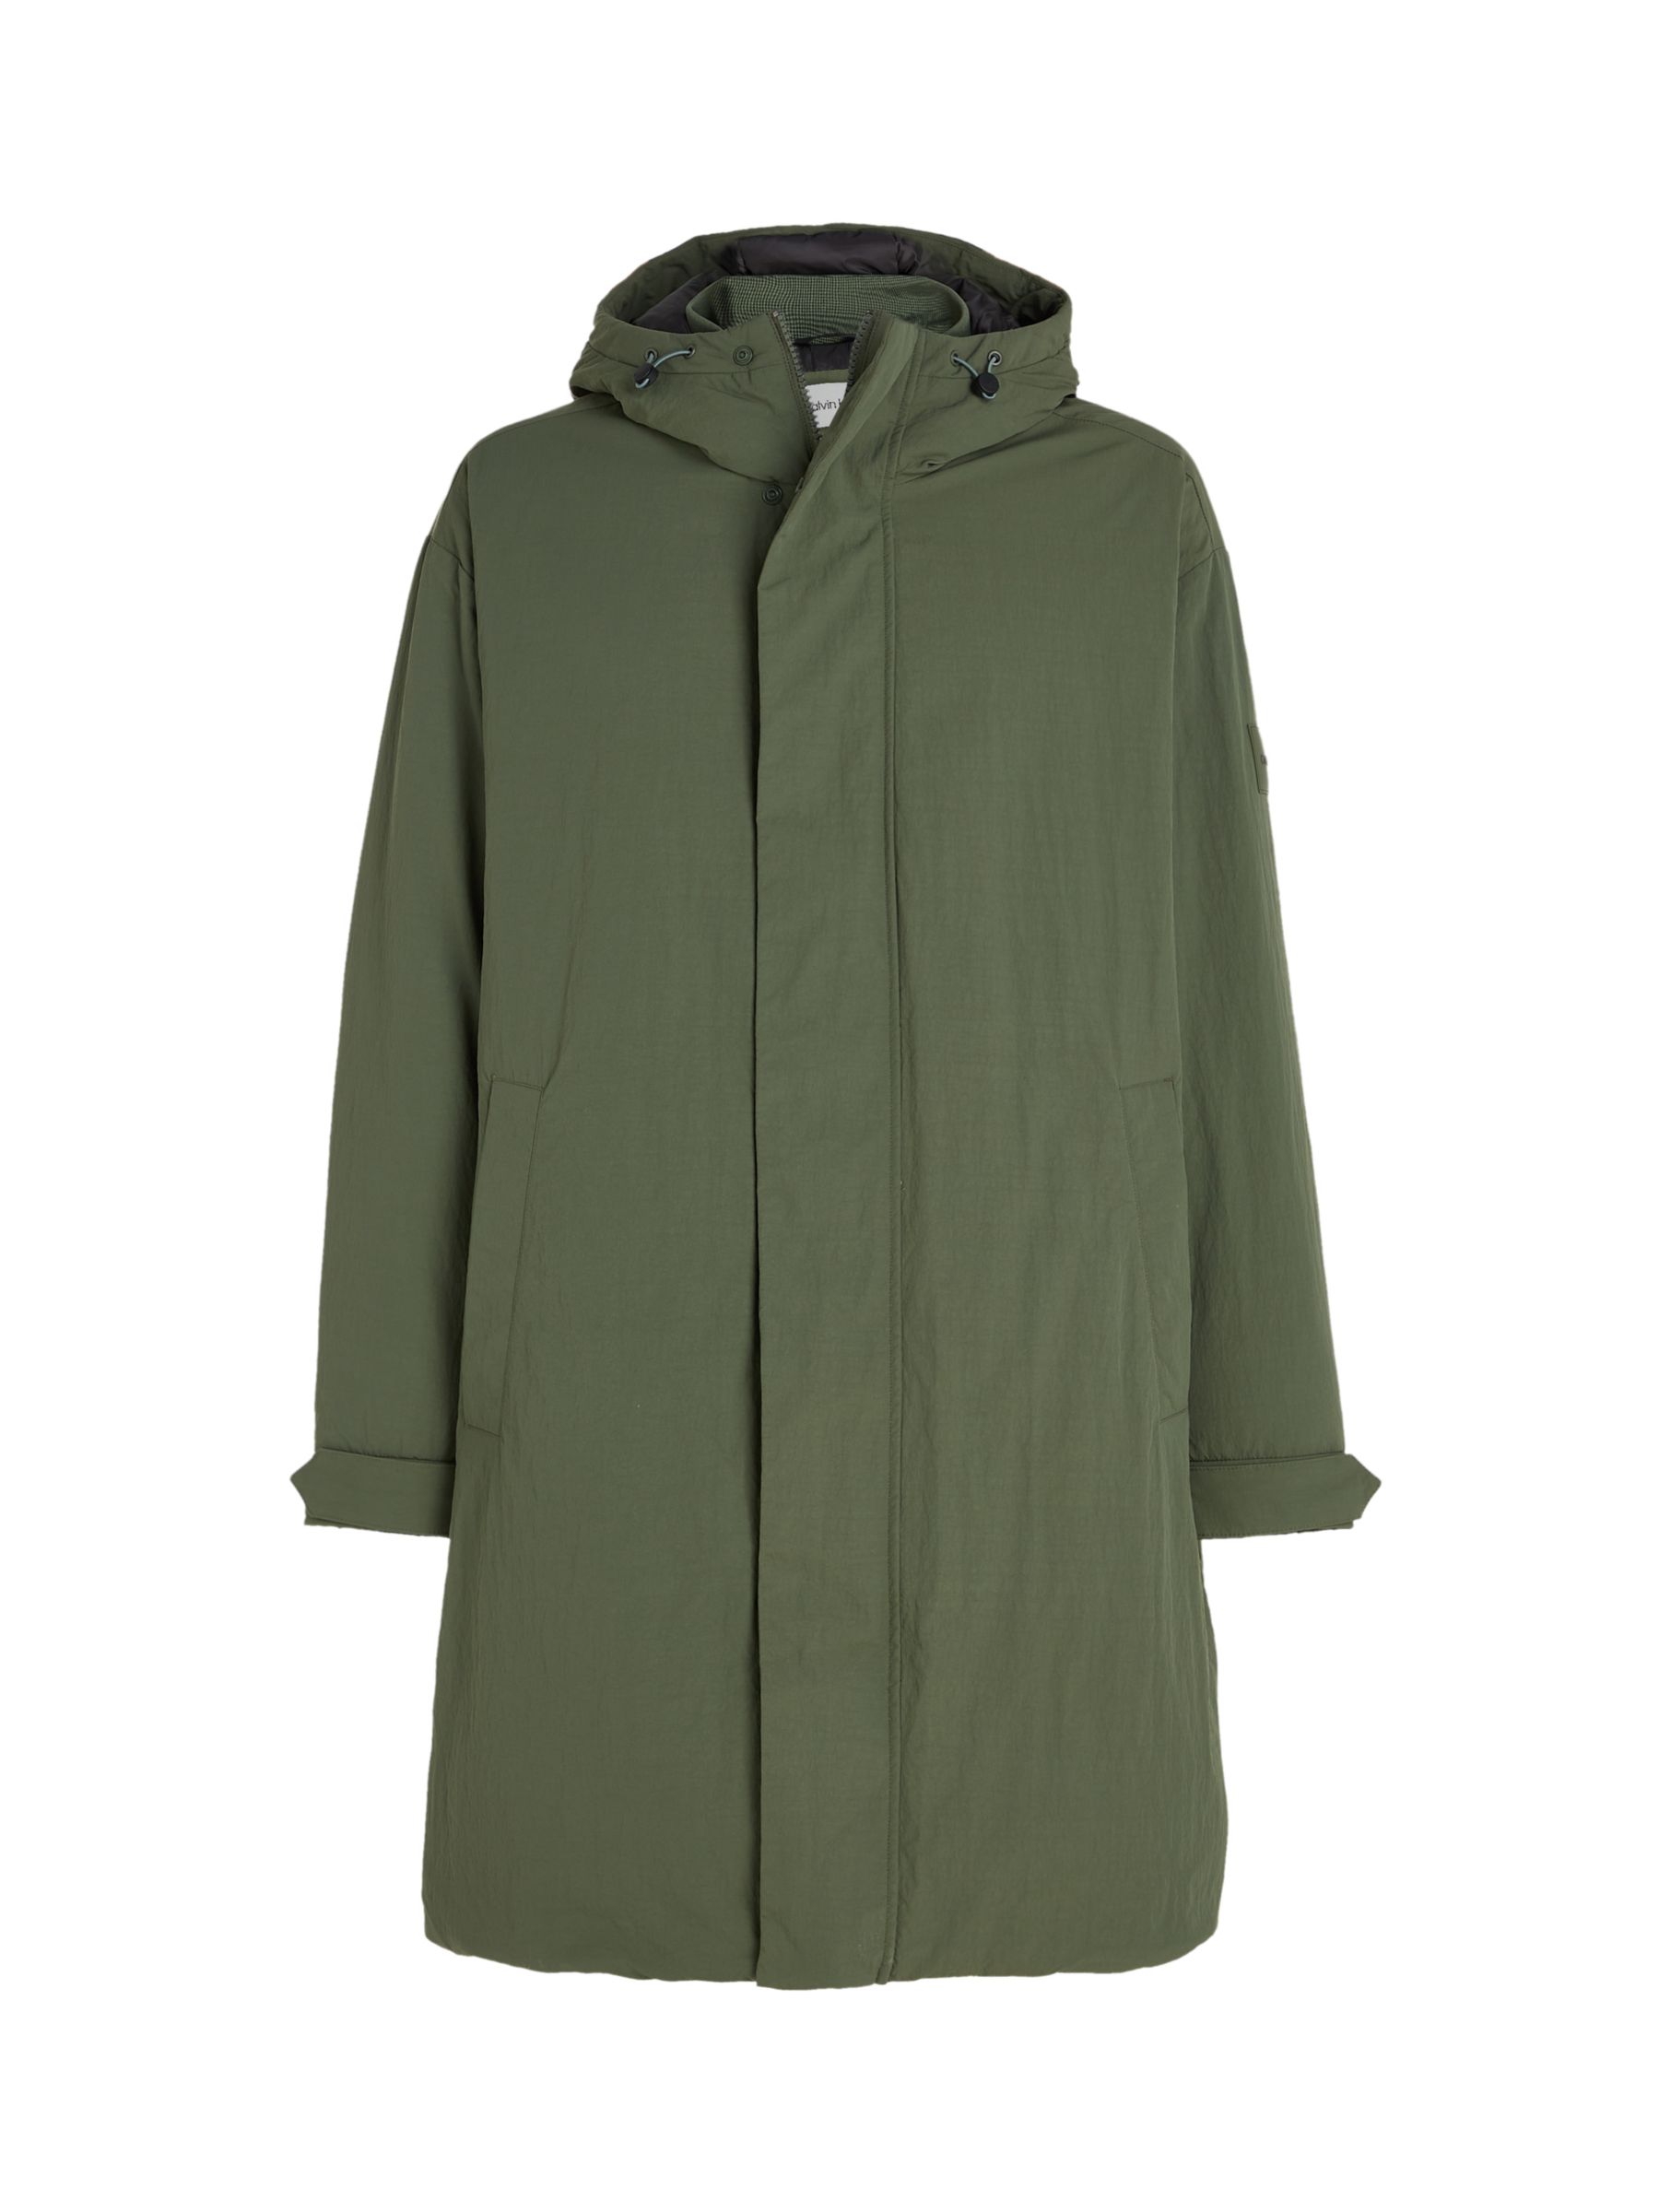 Calvin Klein Relaxed Fit Parka, Thyme at John Lewis & Partners